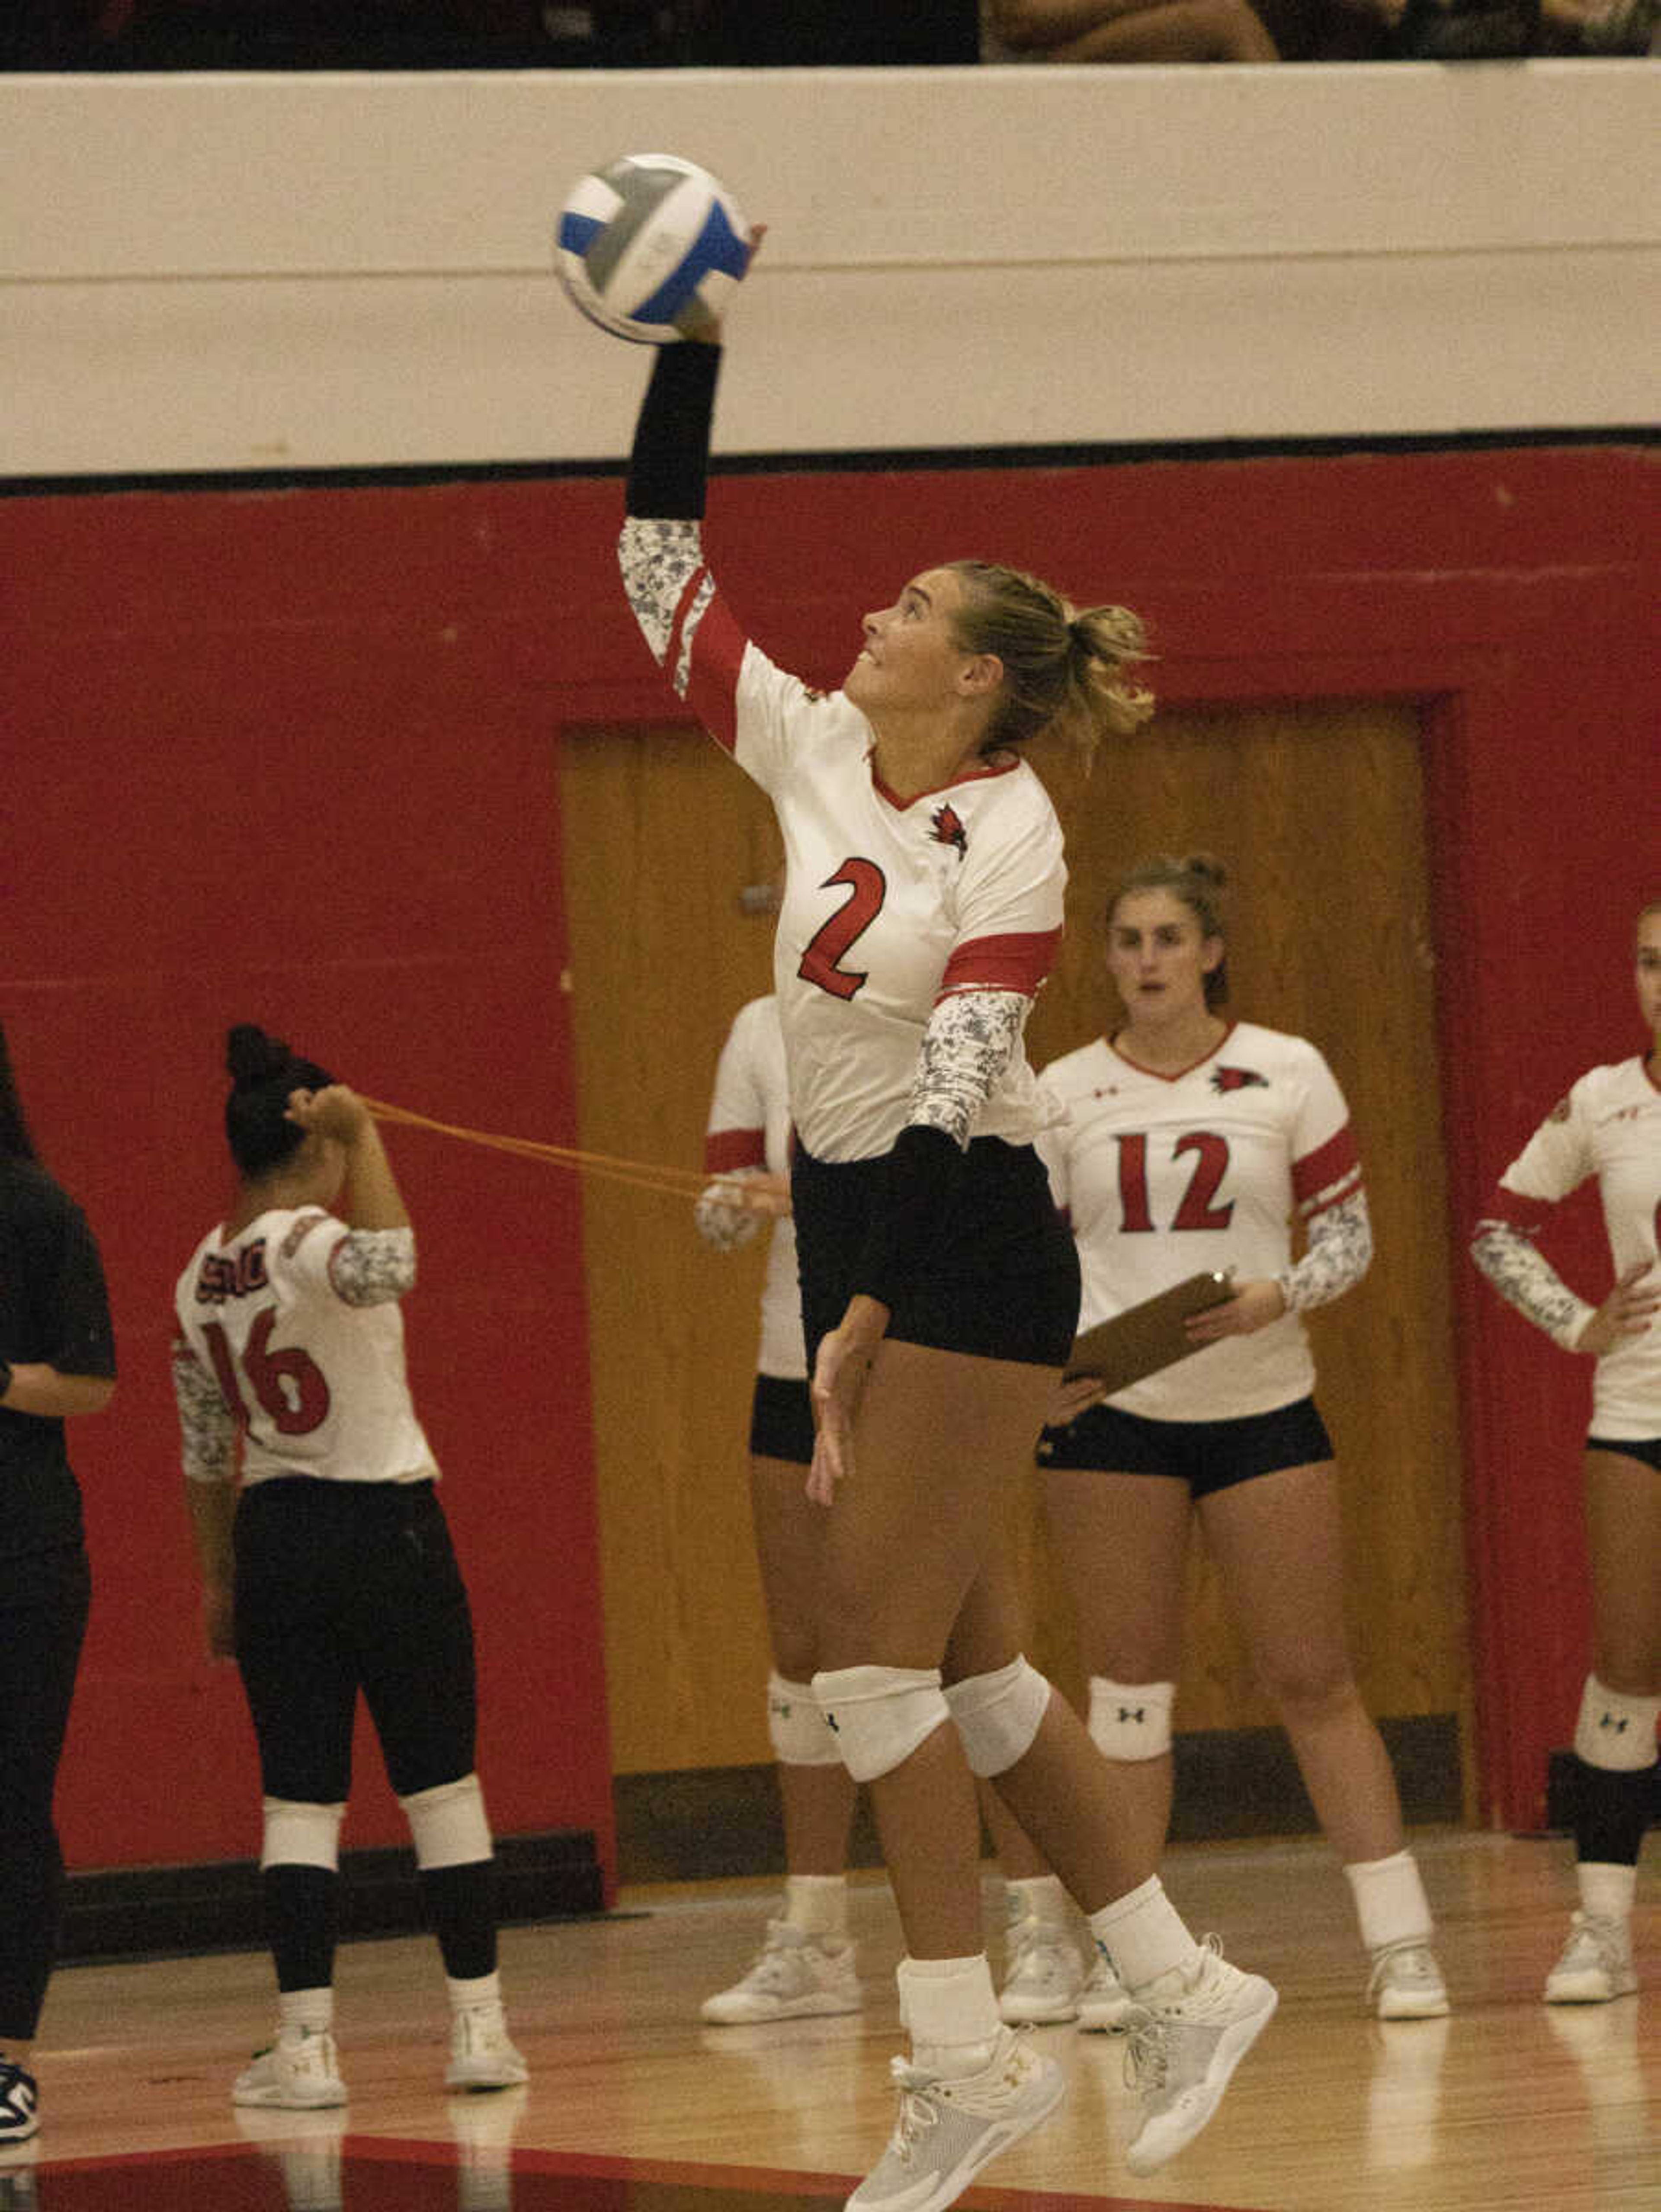 Lucy Arndt goes to serve the volleyball over the net for a point for the Redhawks on Aug. 25.